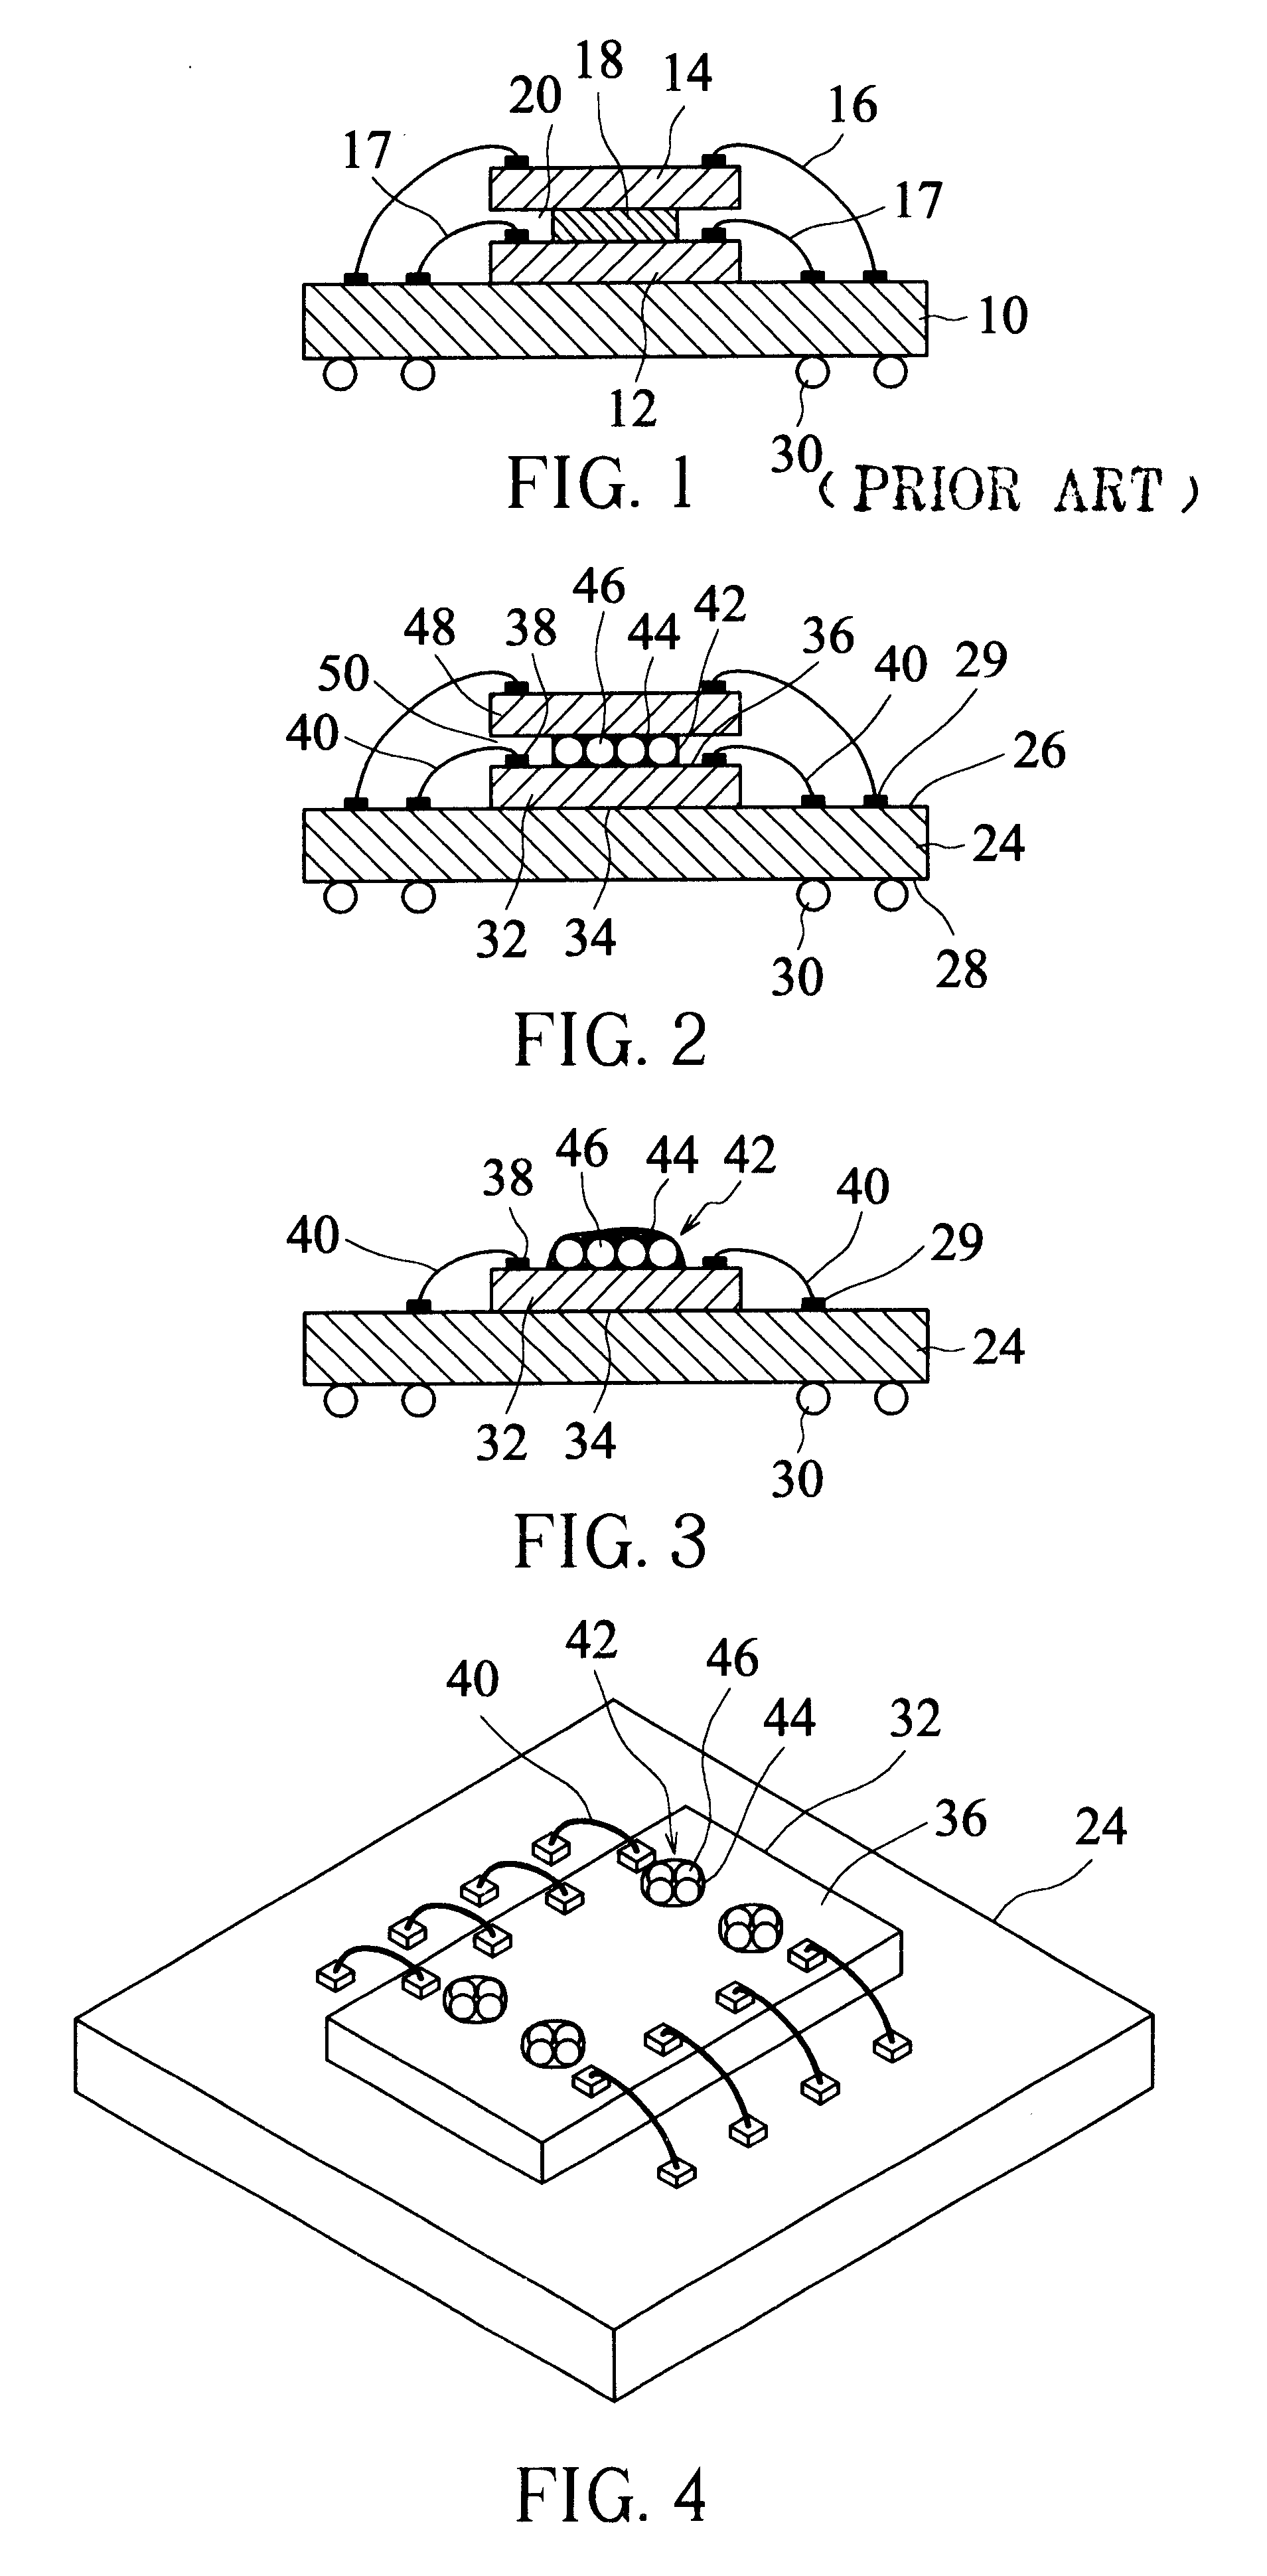 Structure of stacked integrated circuits